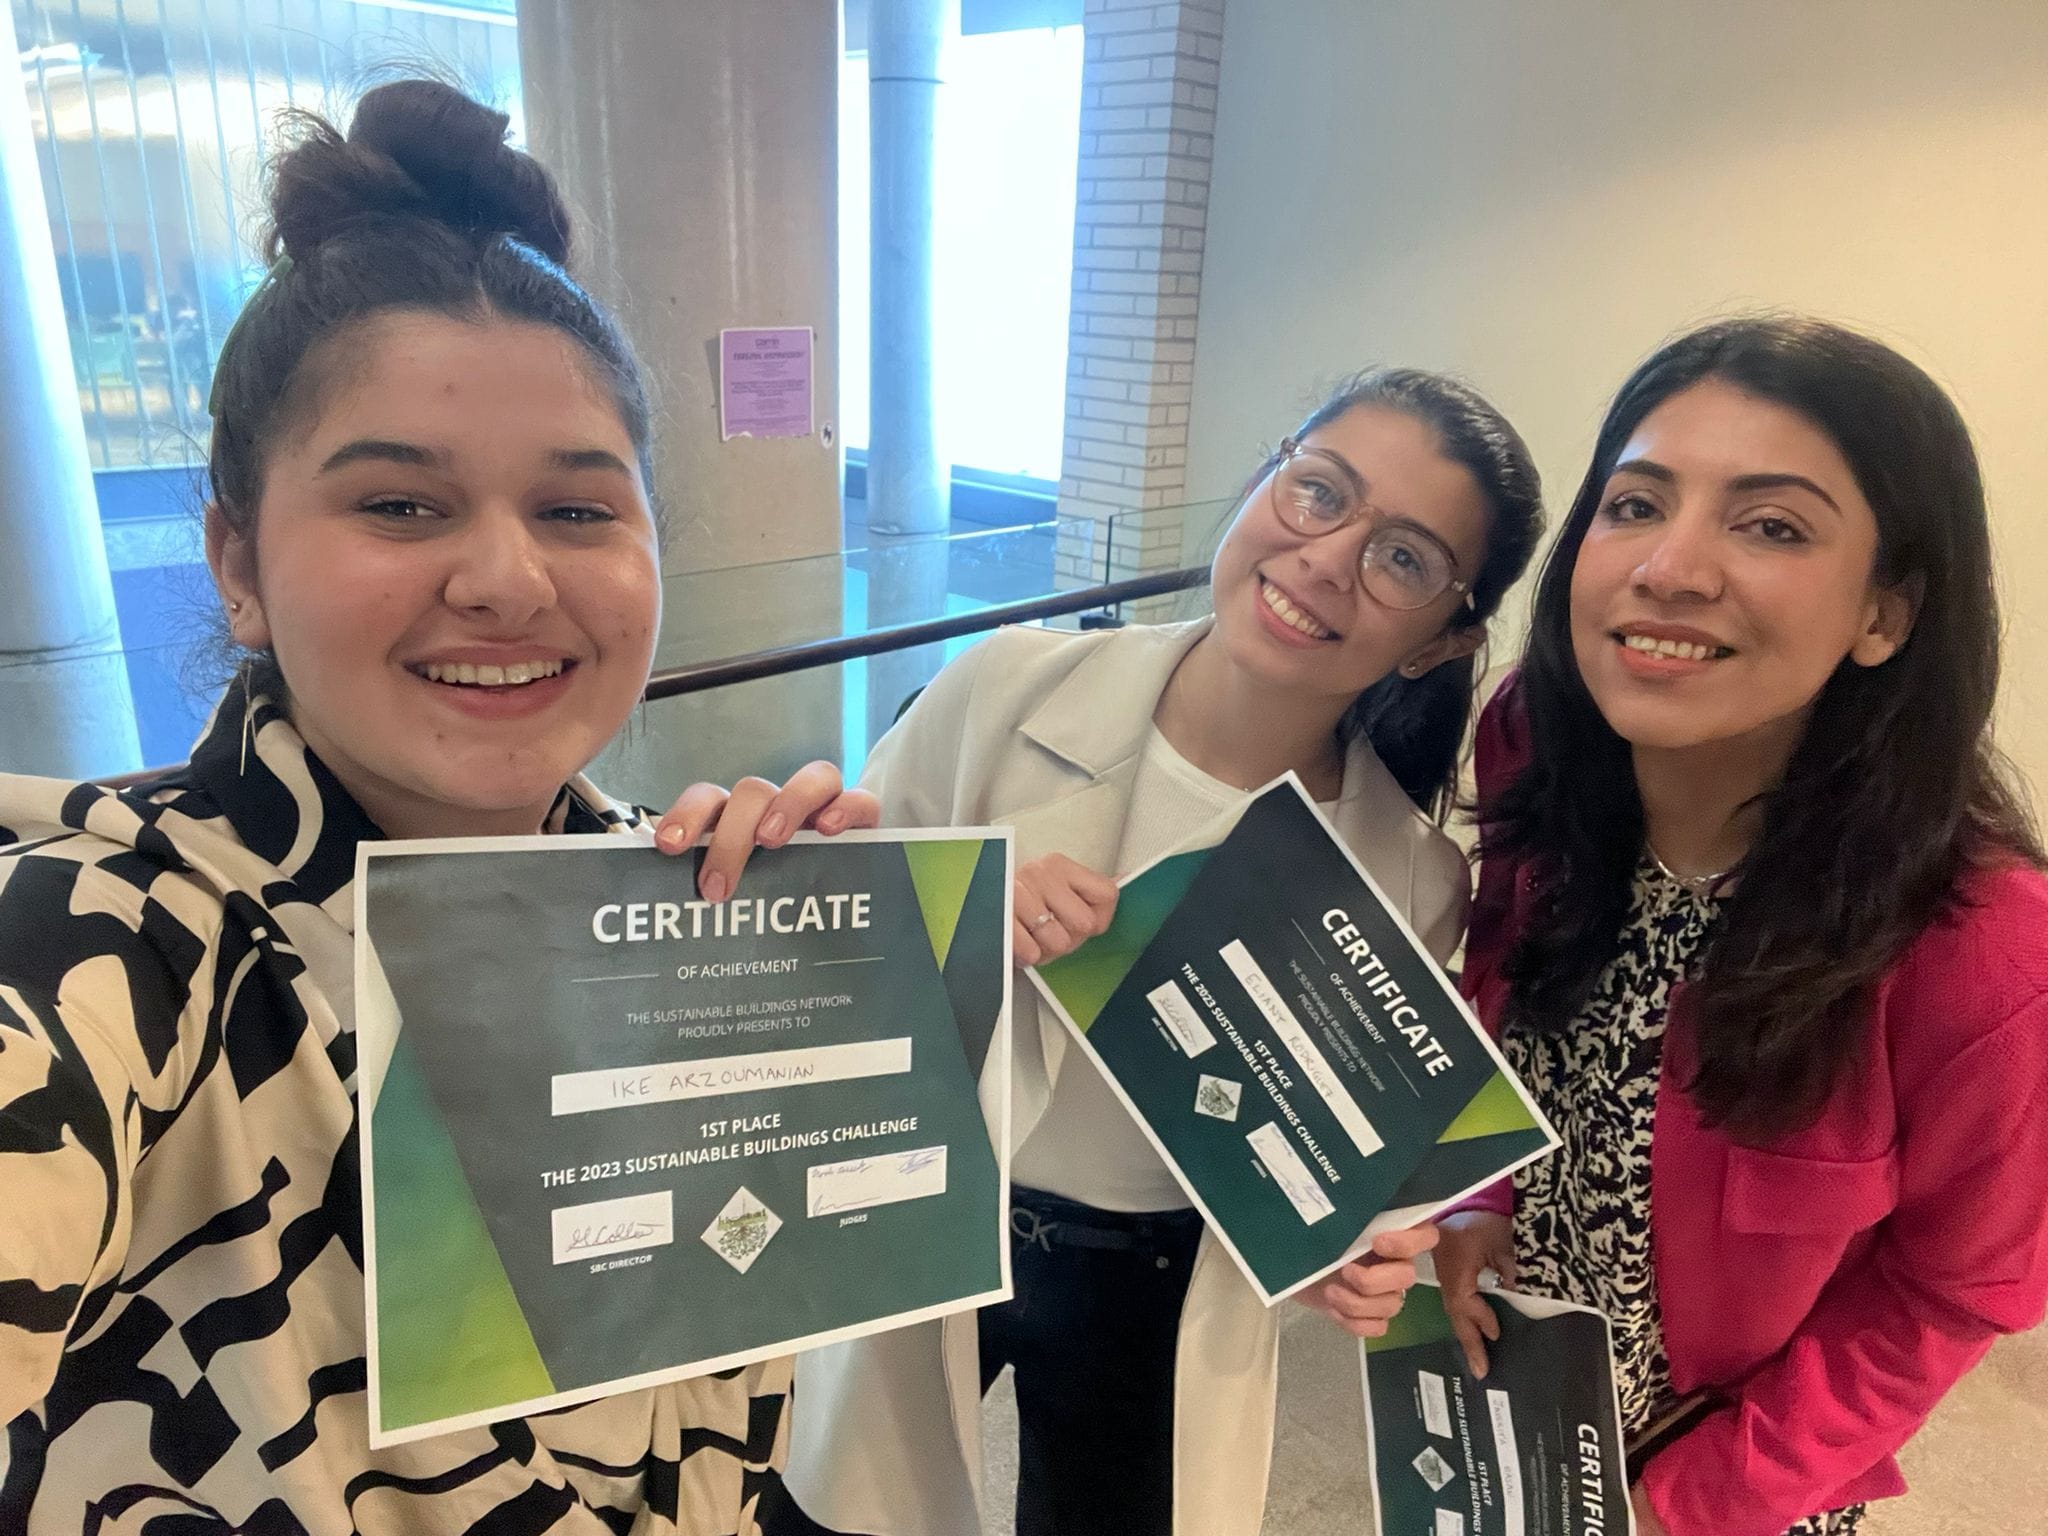 Ike Arzoumanian (CivE 2T5) -left, Eliany Rodriguez, Javeriya Hasan smiling and showing their certificates.